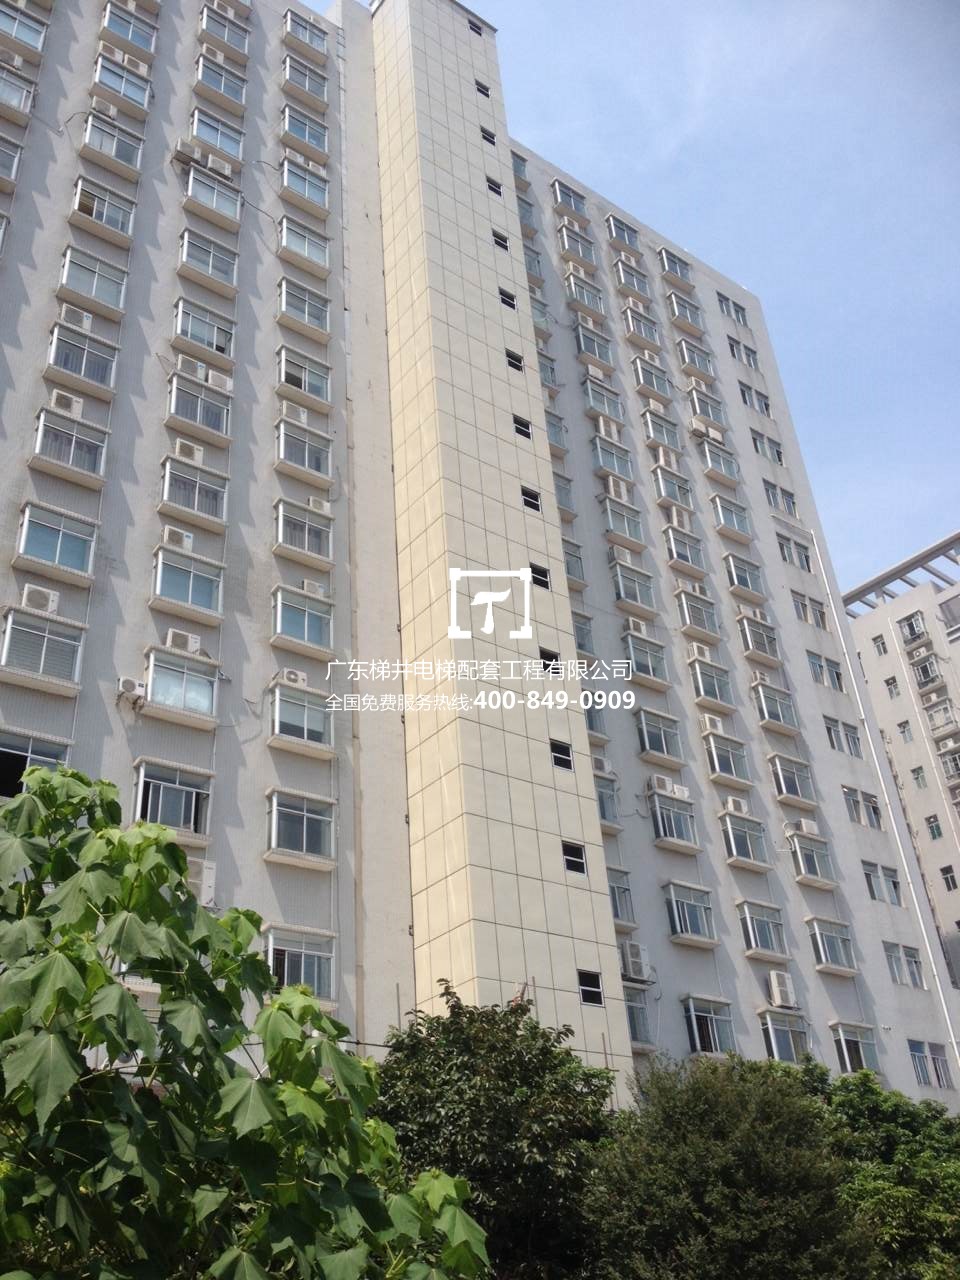 Guangzhou Gugu Property Services Limited (Gufeng Building)